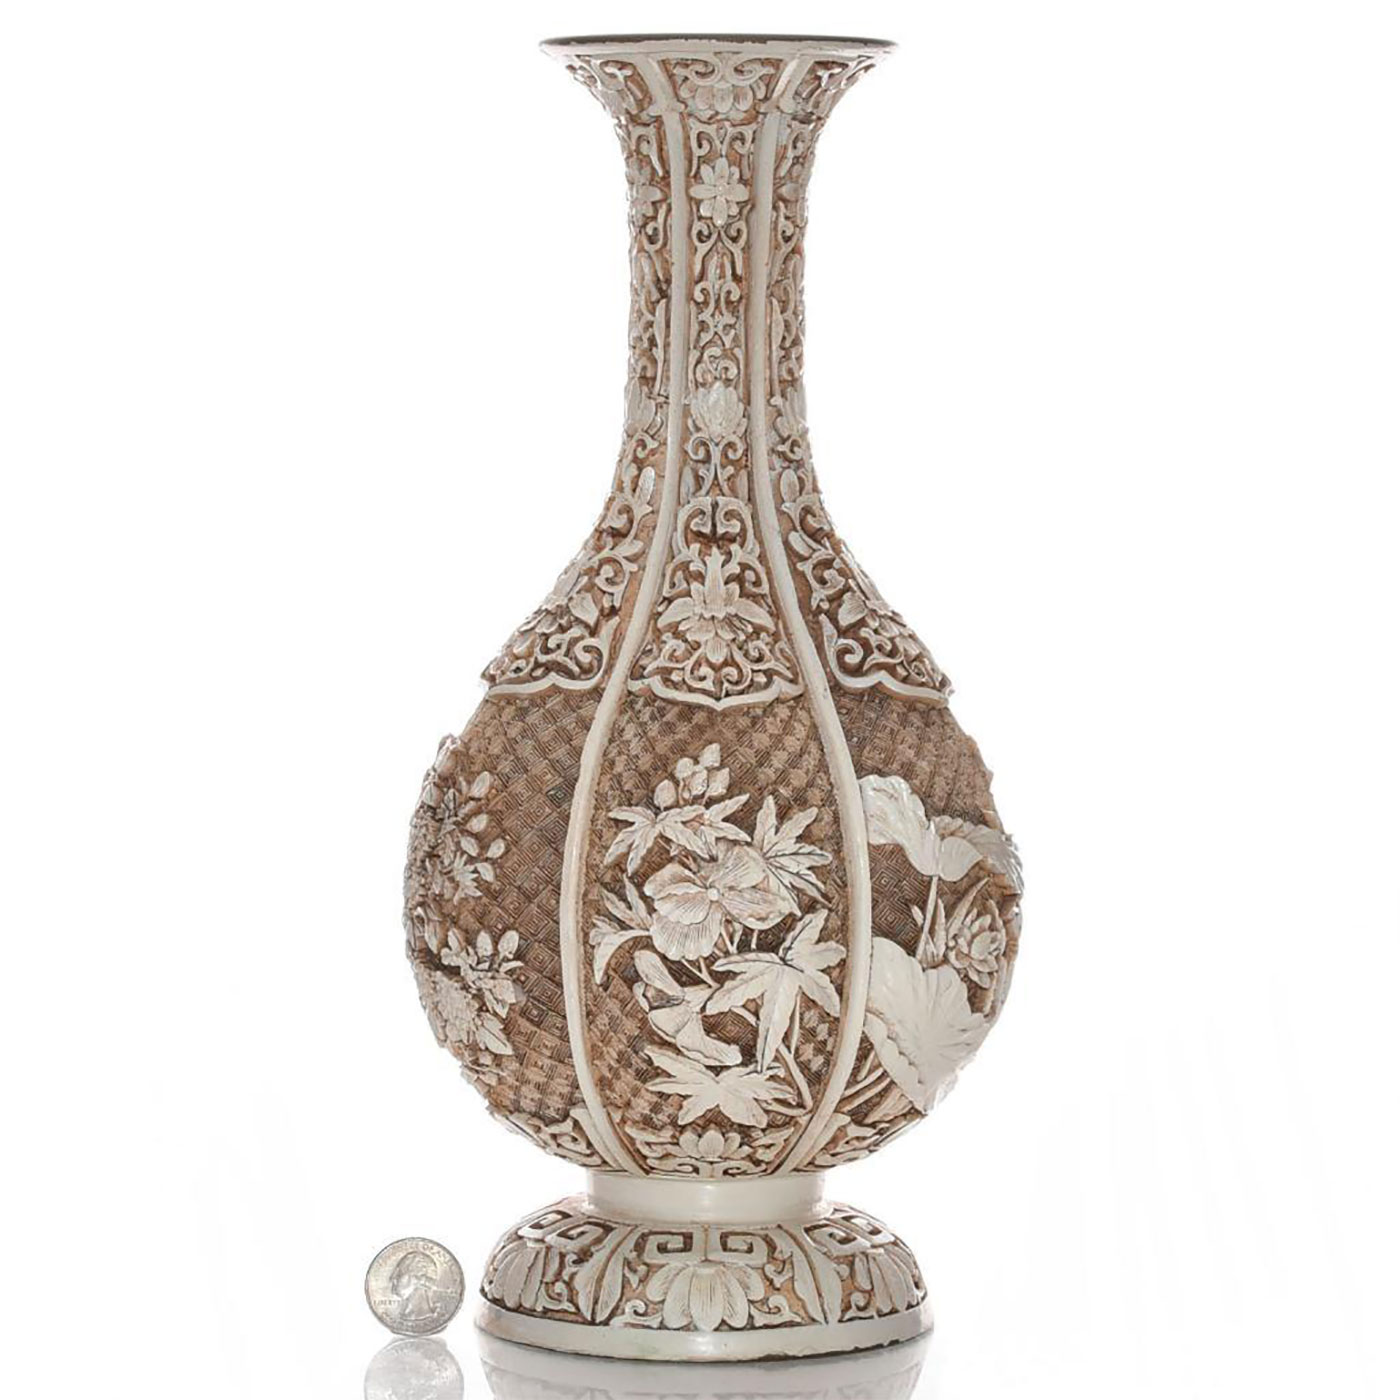 David Farin Collection Chinese Vase-1